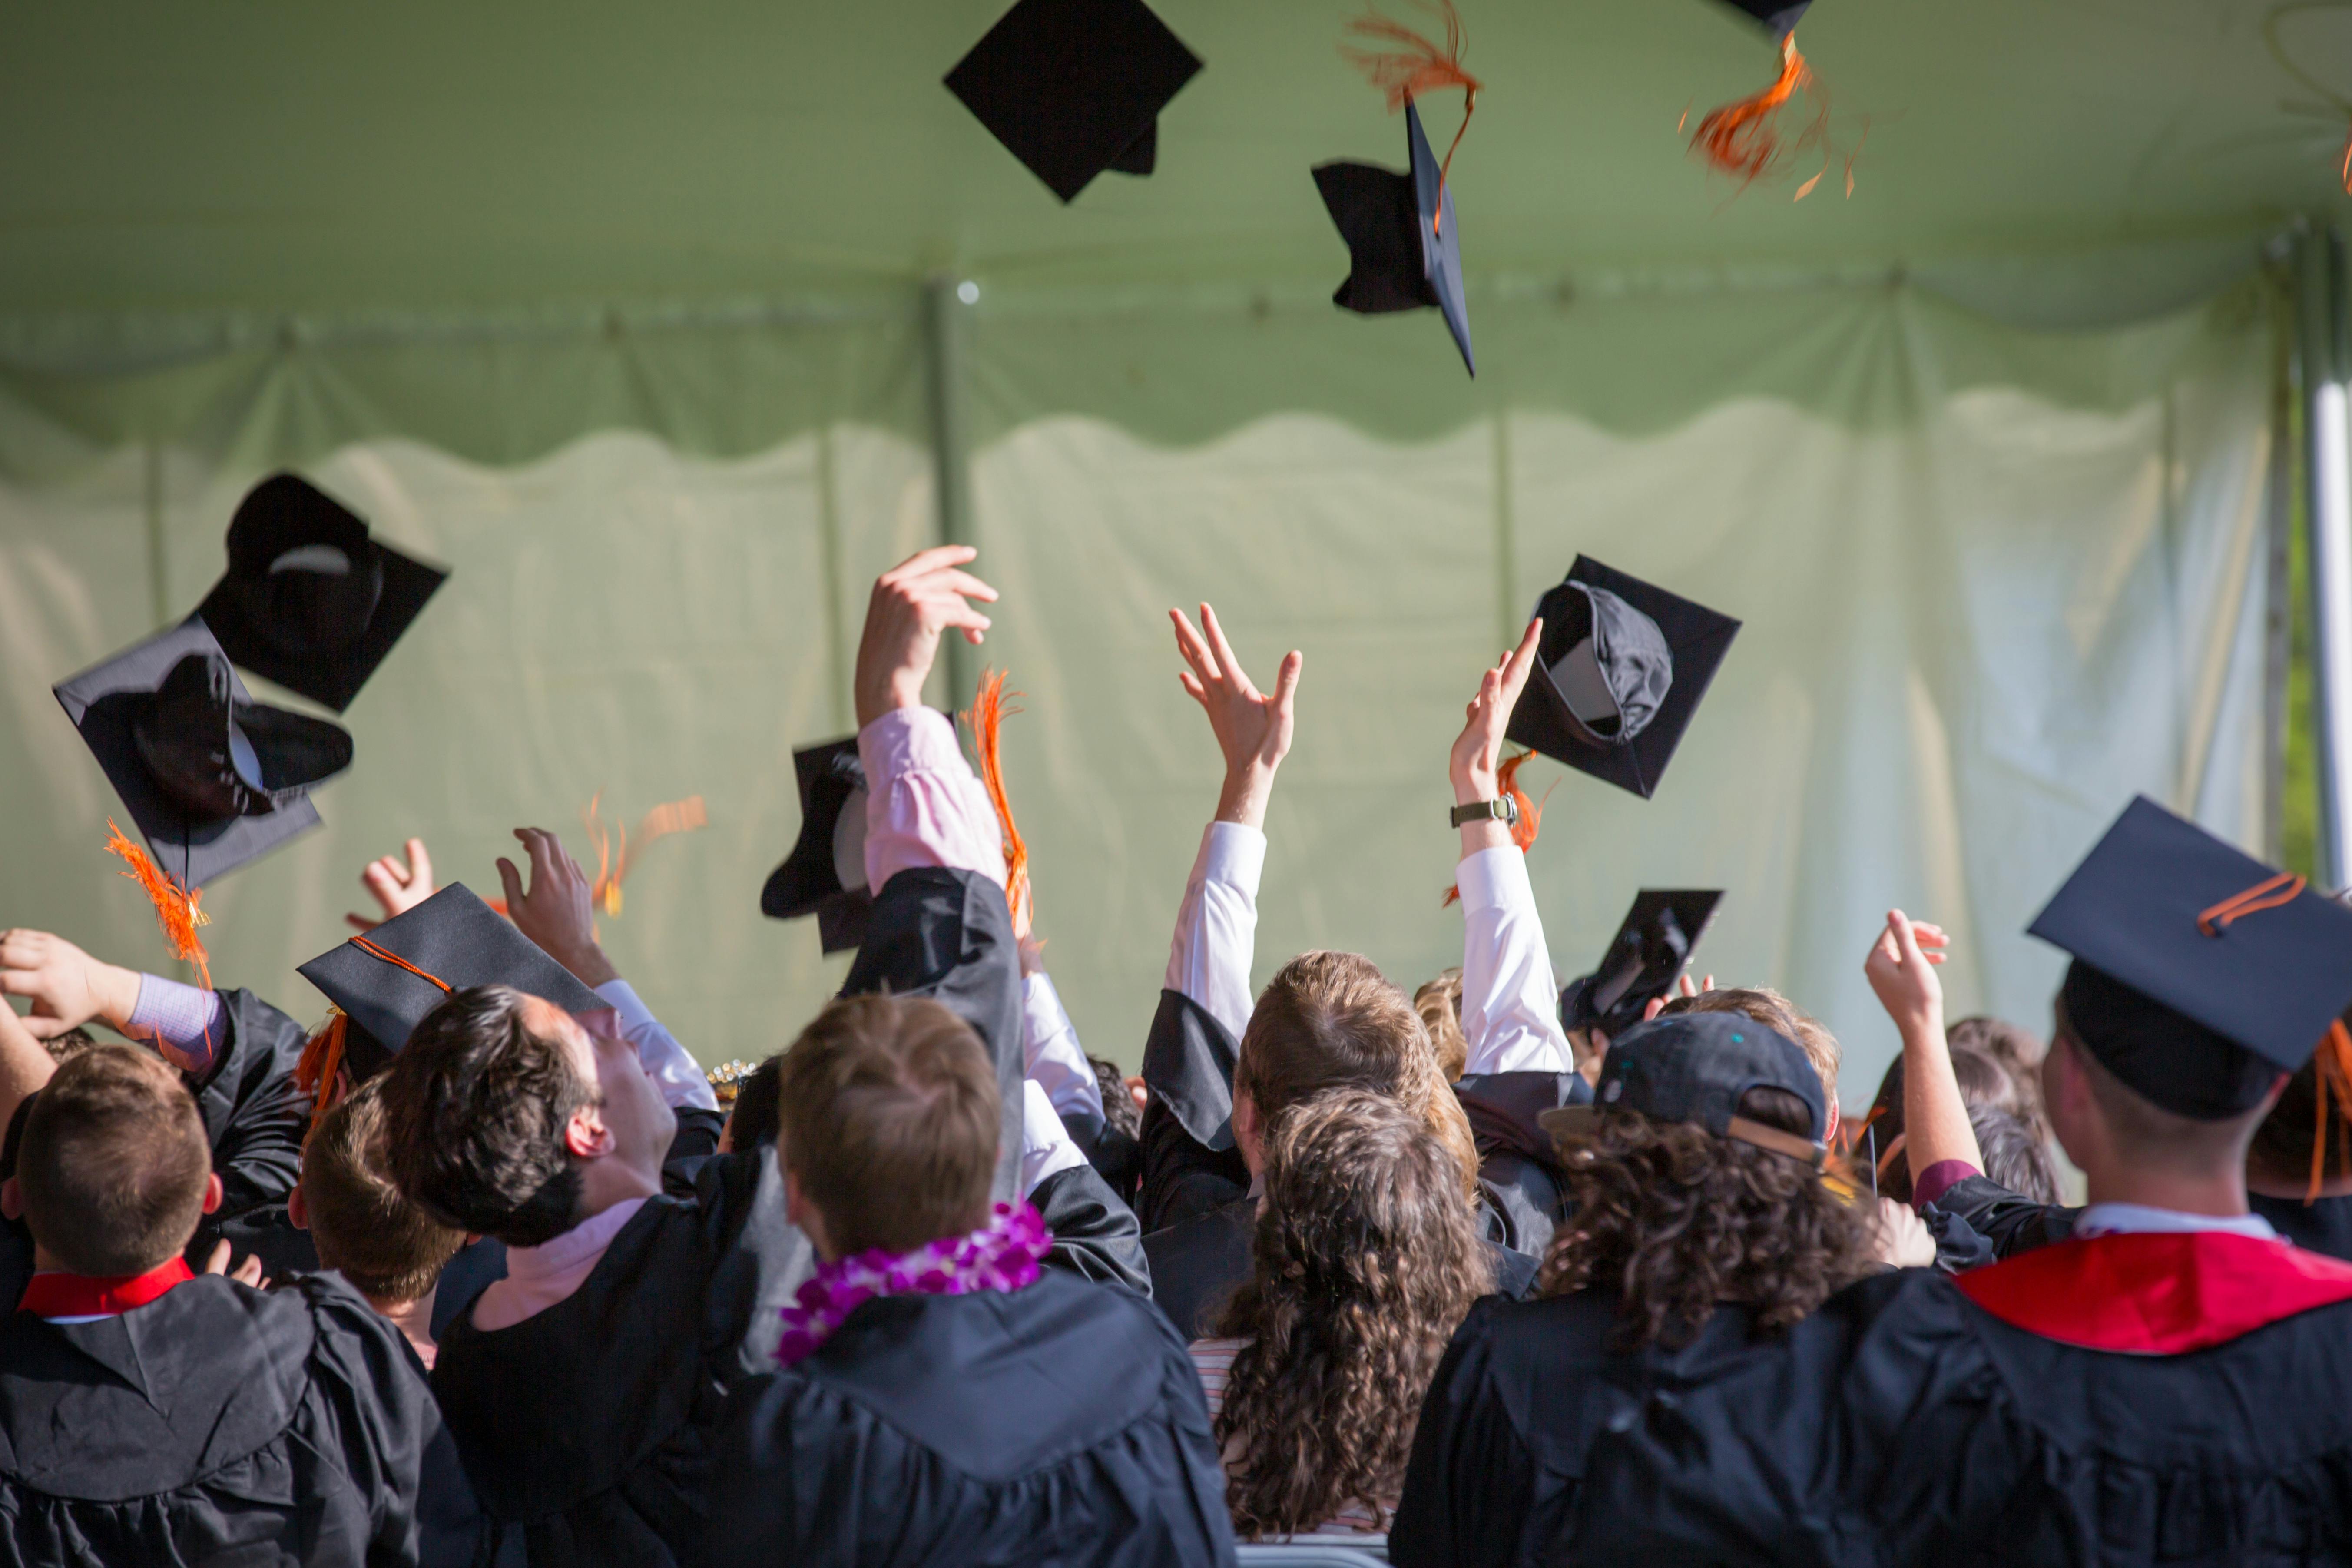 A group of students throwing their graduation caps into the air | Source: Emily Ranquist on Pexels